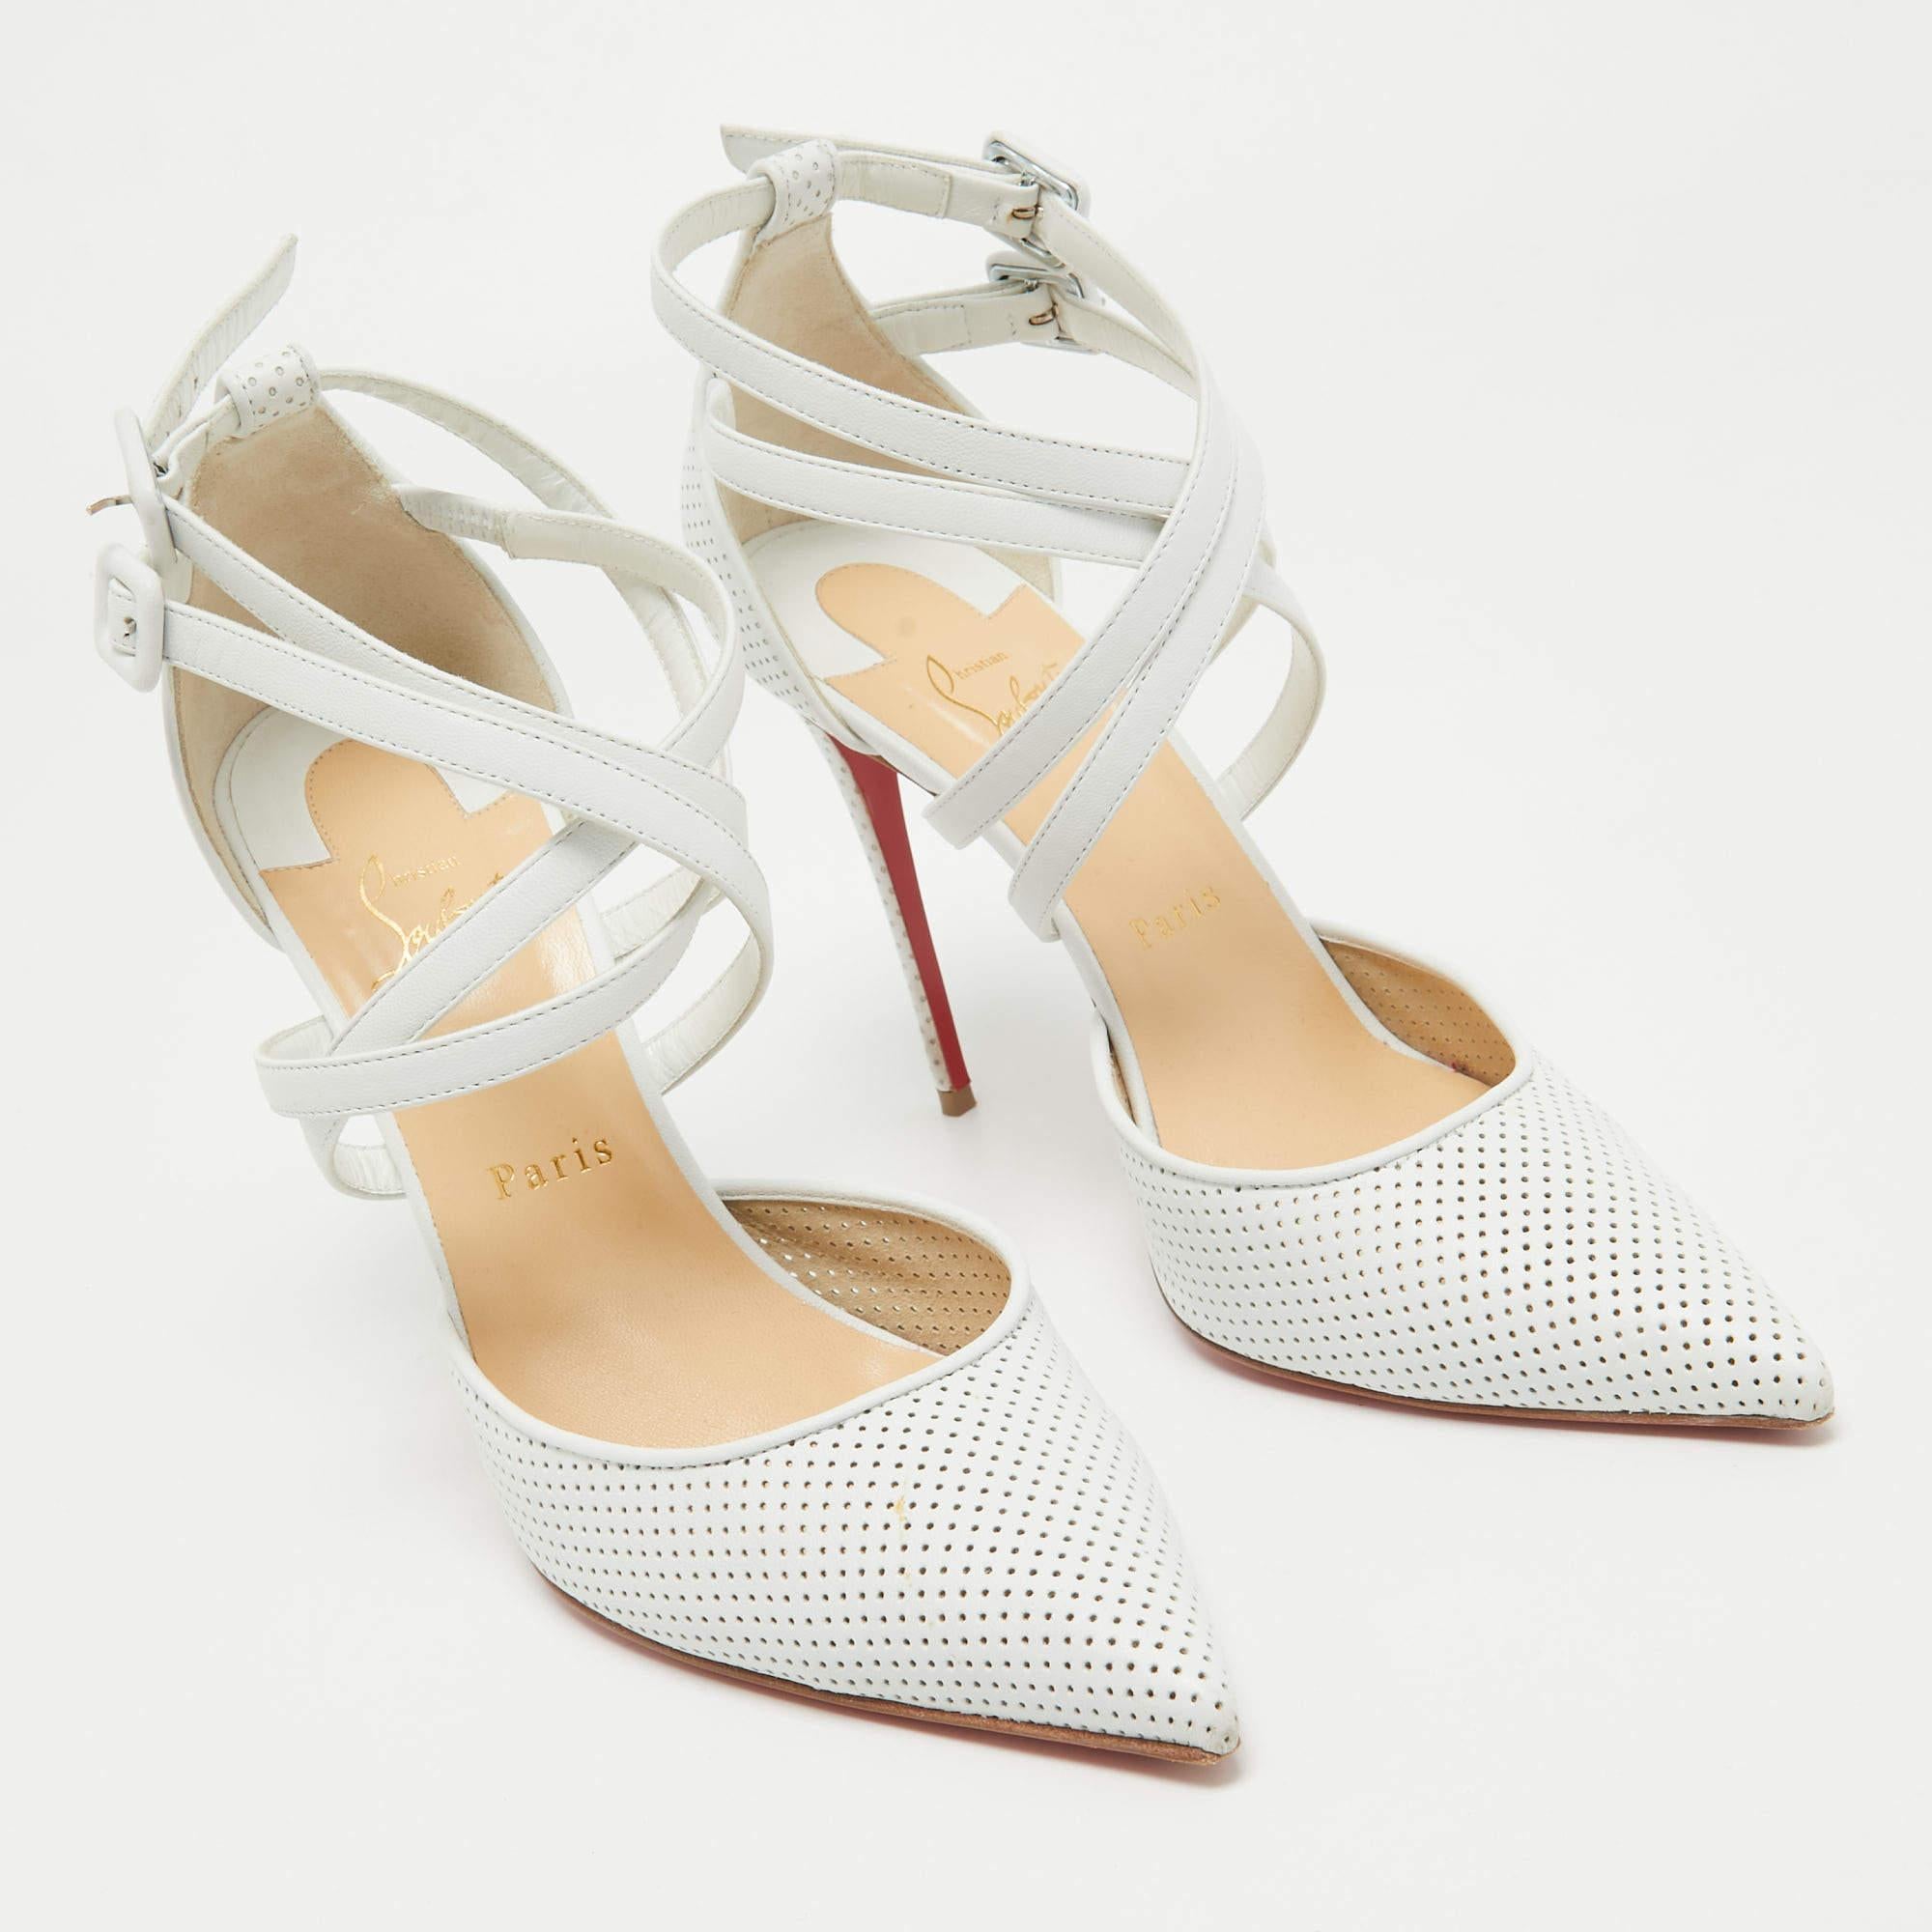 Christian Louboutin White Perforated Leather Victororilla Pumps Size 39.5 For Sale 1